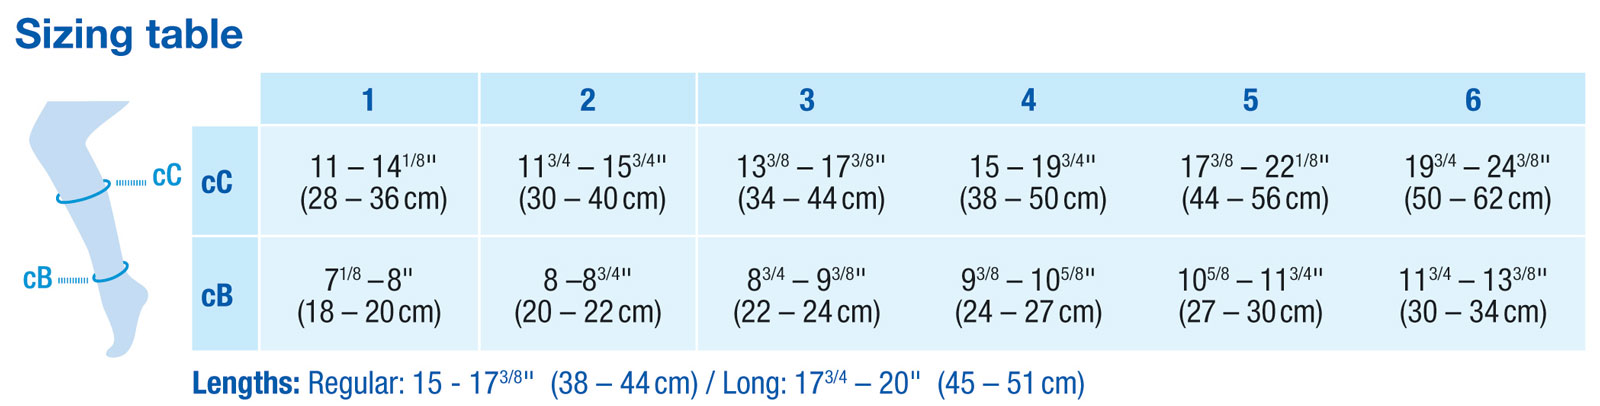 jobst for men ambition sizing chart